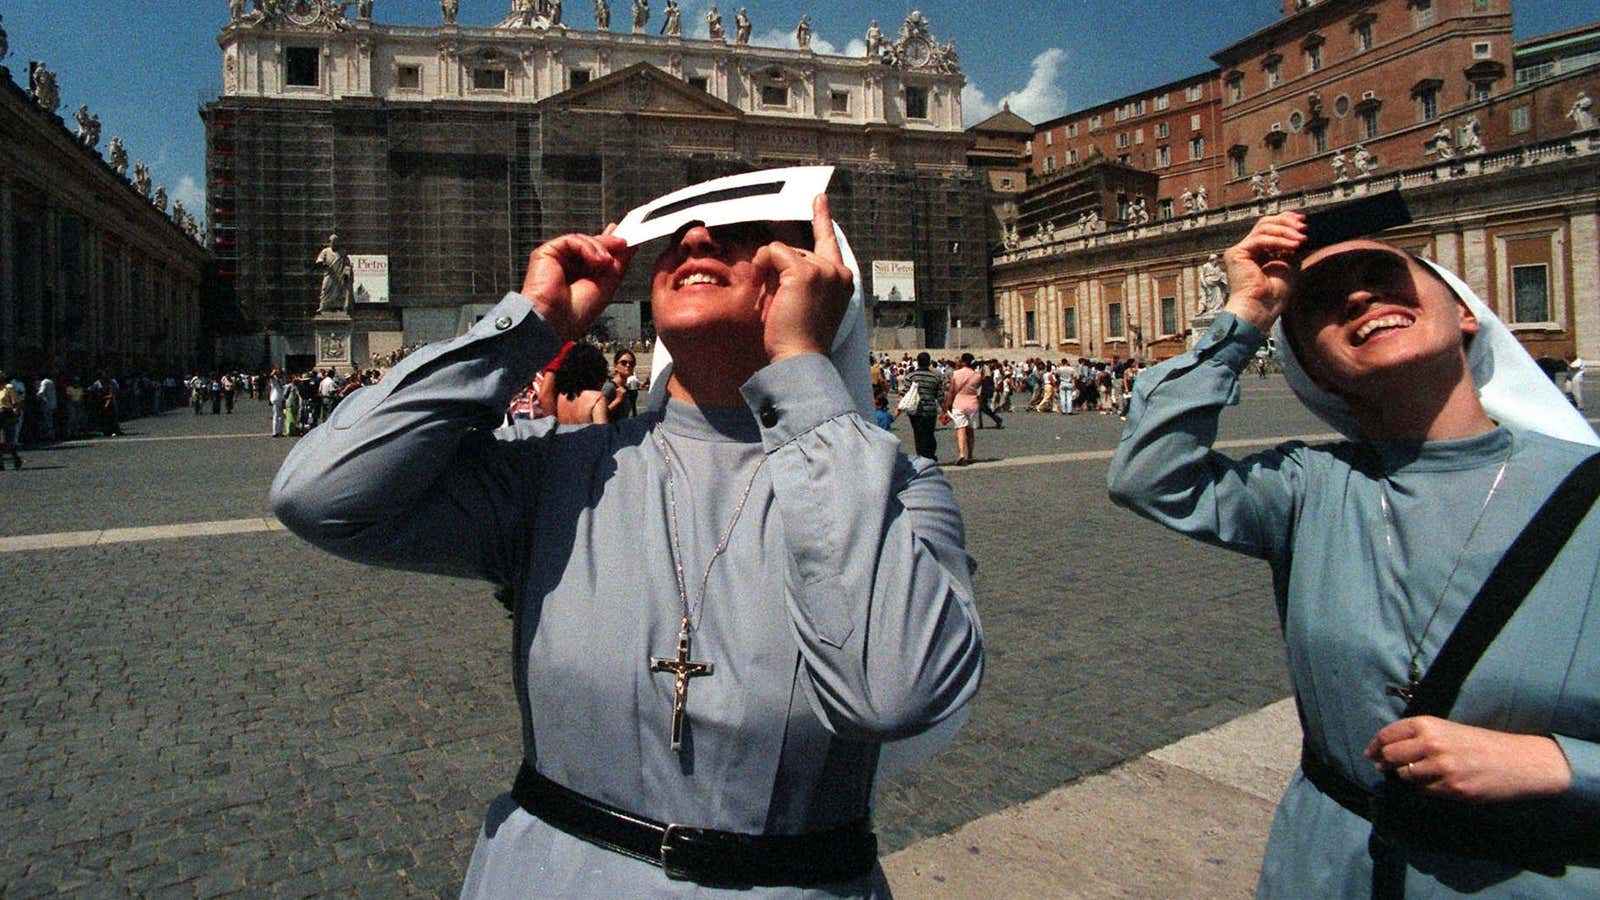 Two unidentified nuns watch a solar eclipse through protective glassed outside of St. Peter’s Square at the Vatican, on Aug. 11, 1999.